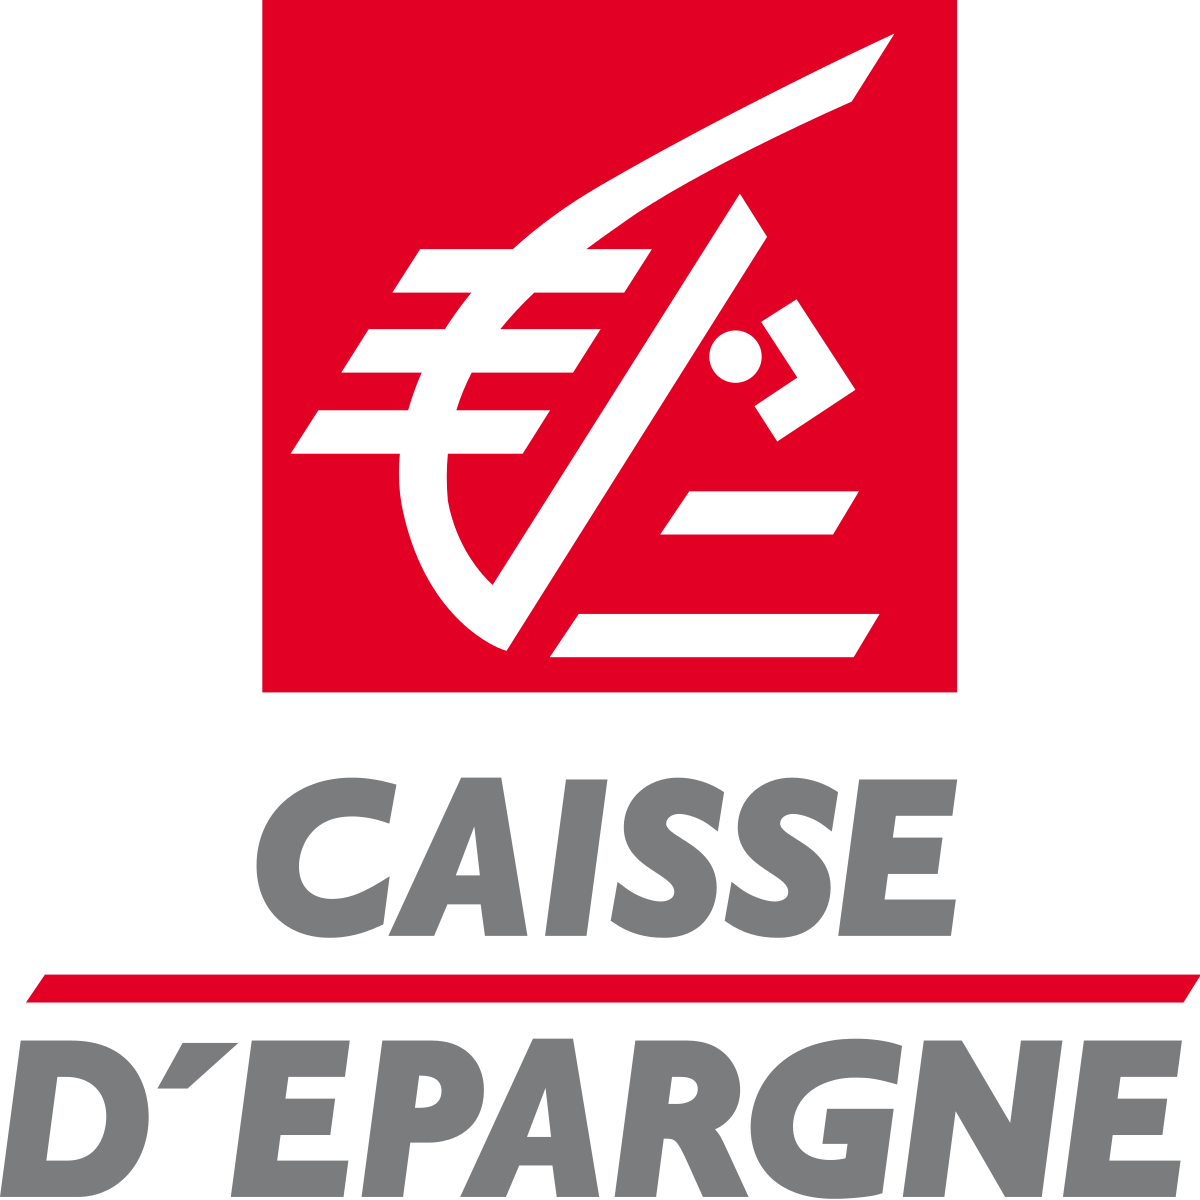 caisse epargne.png